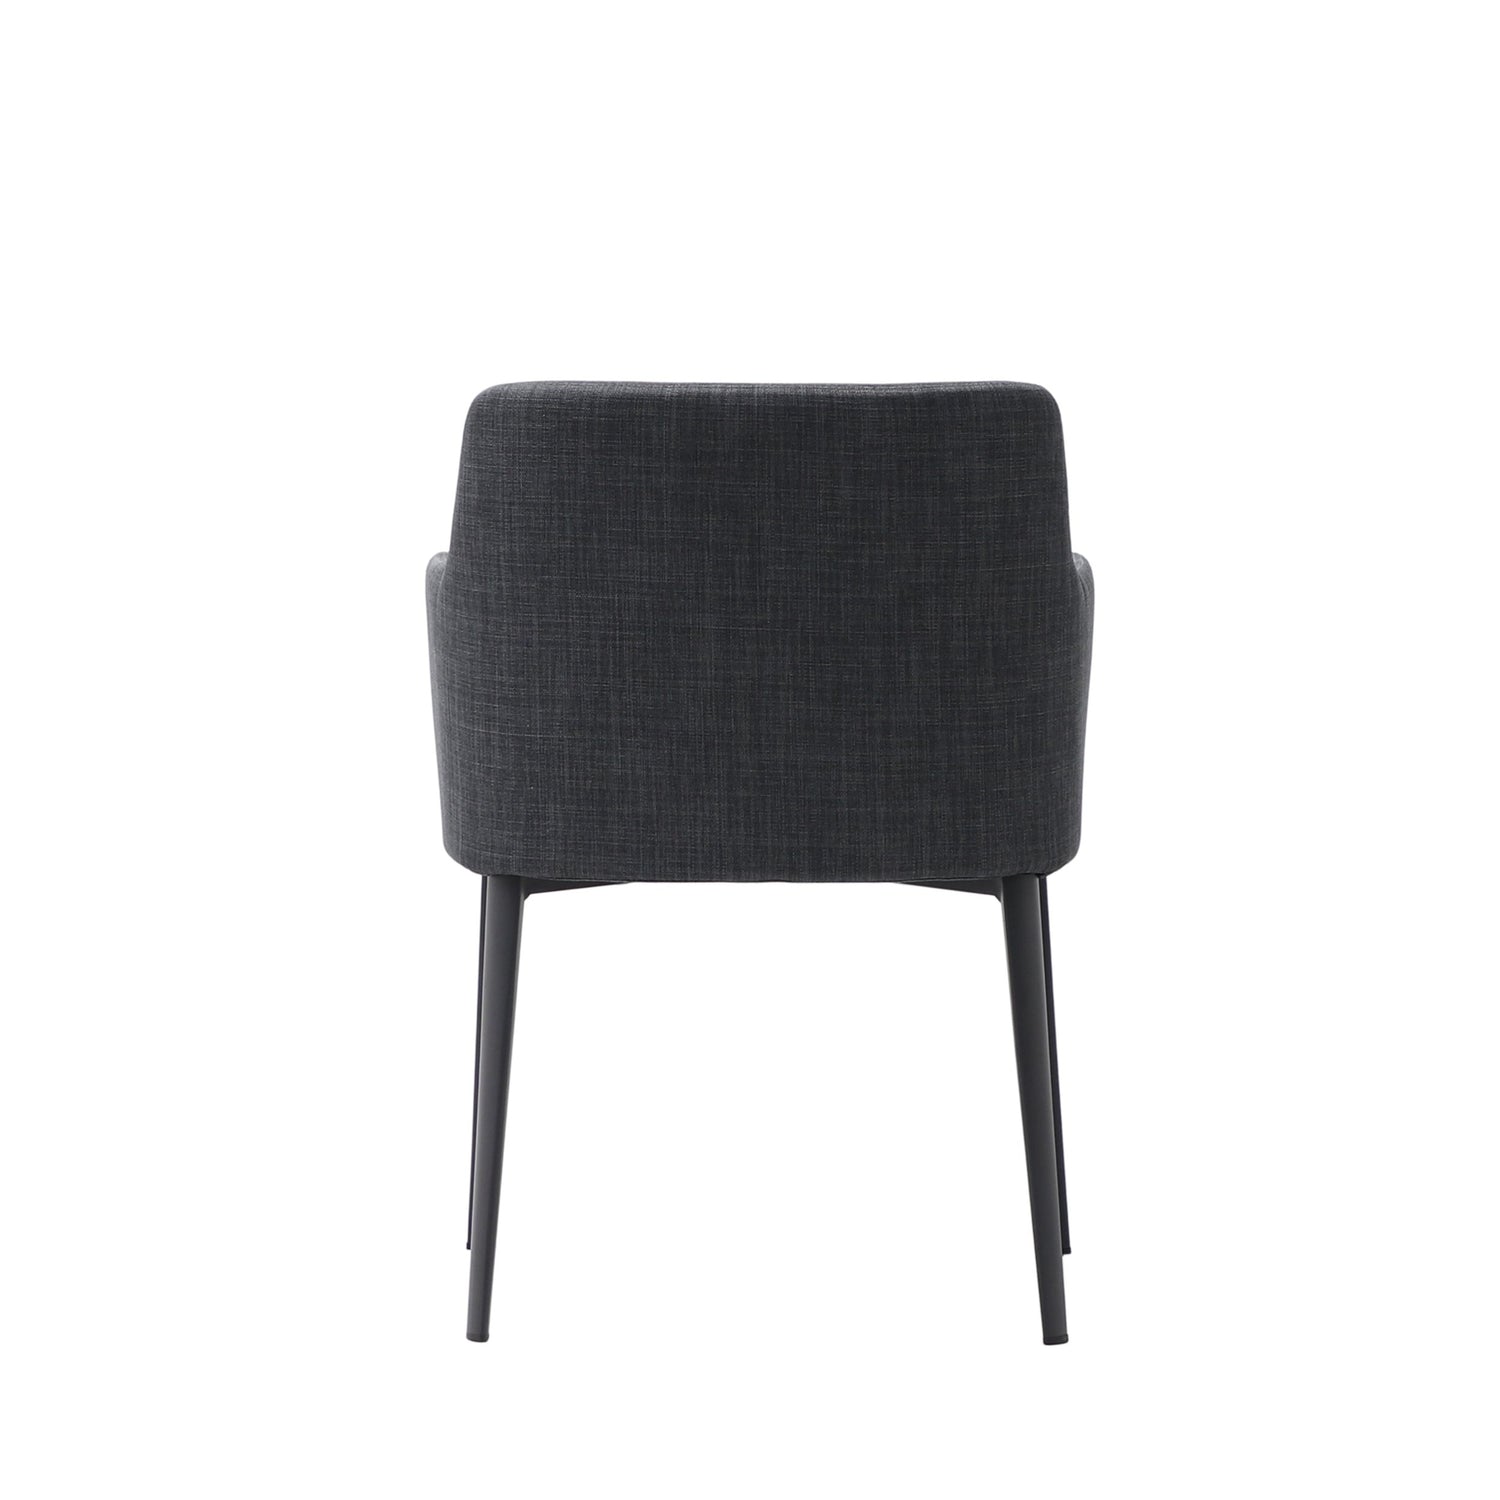 Miller Chair - Charcoal Grey